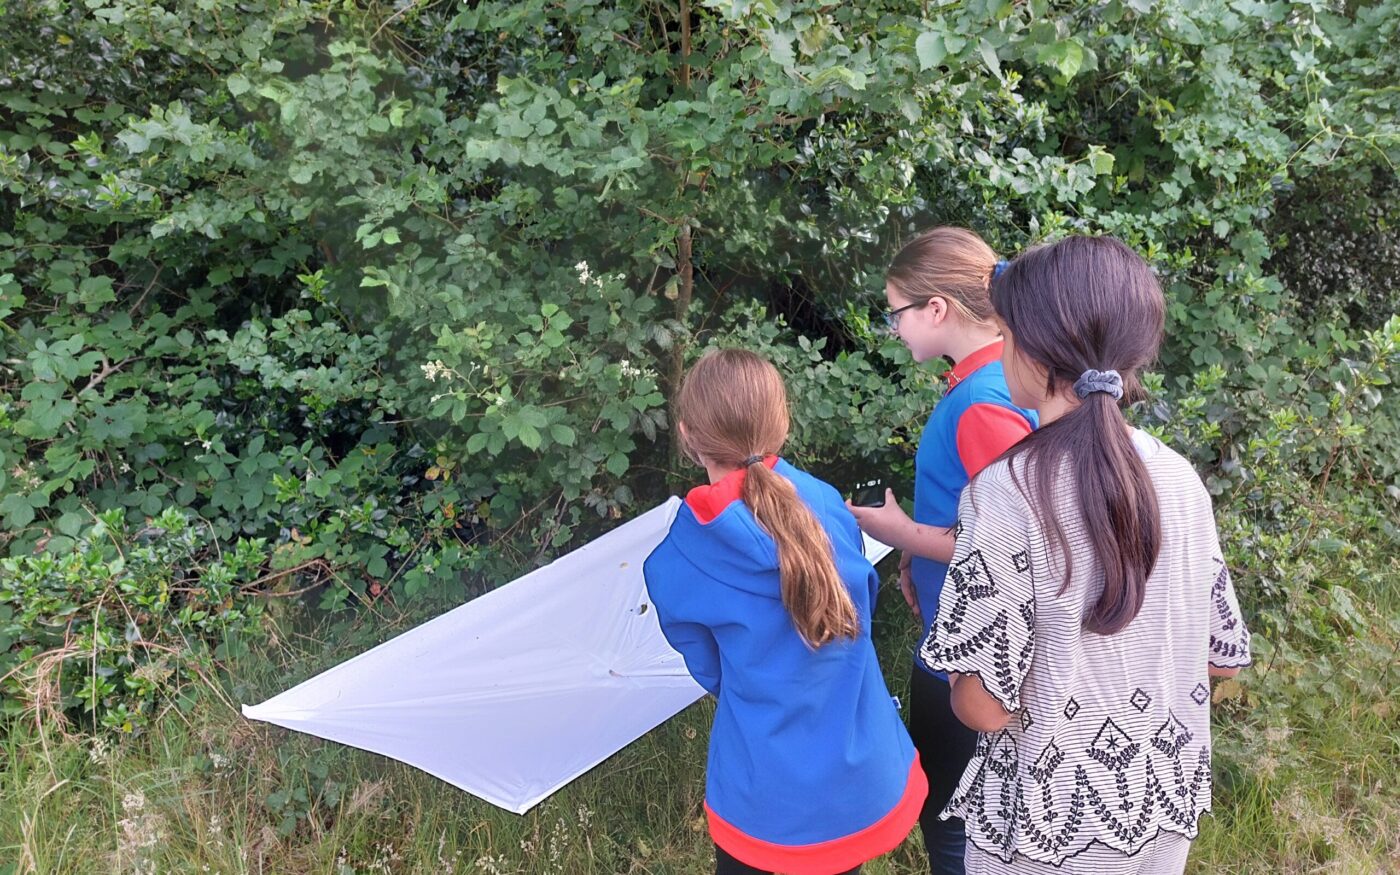 Girlguides use a beating tree to get insects from a tree